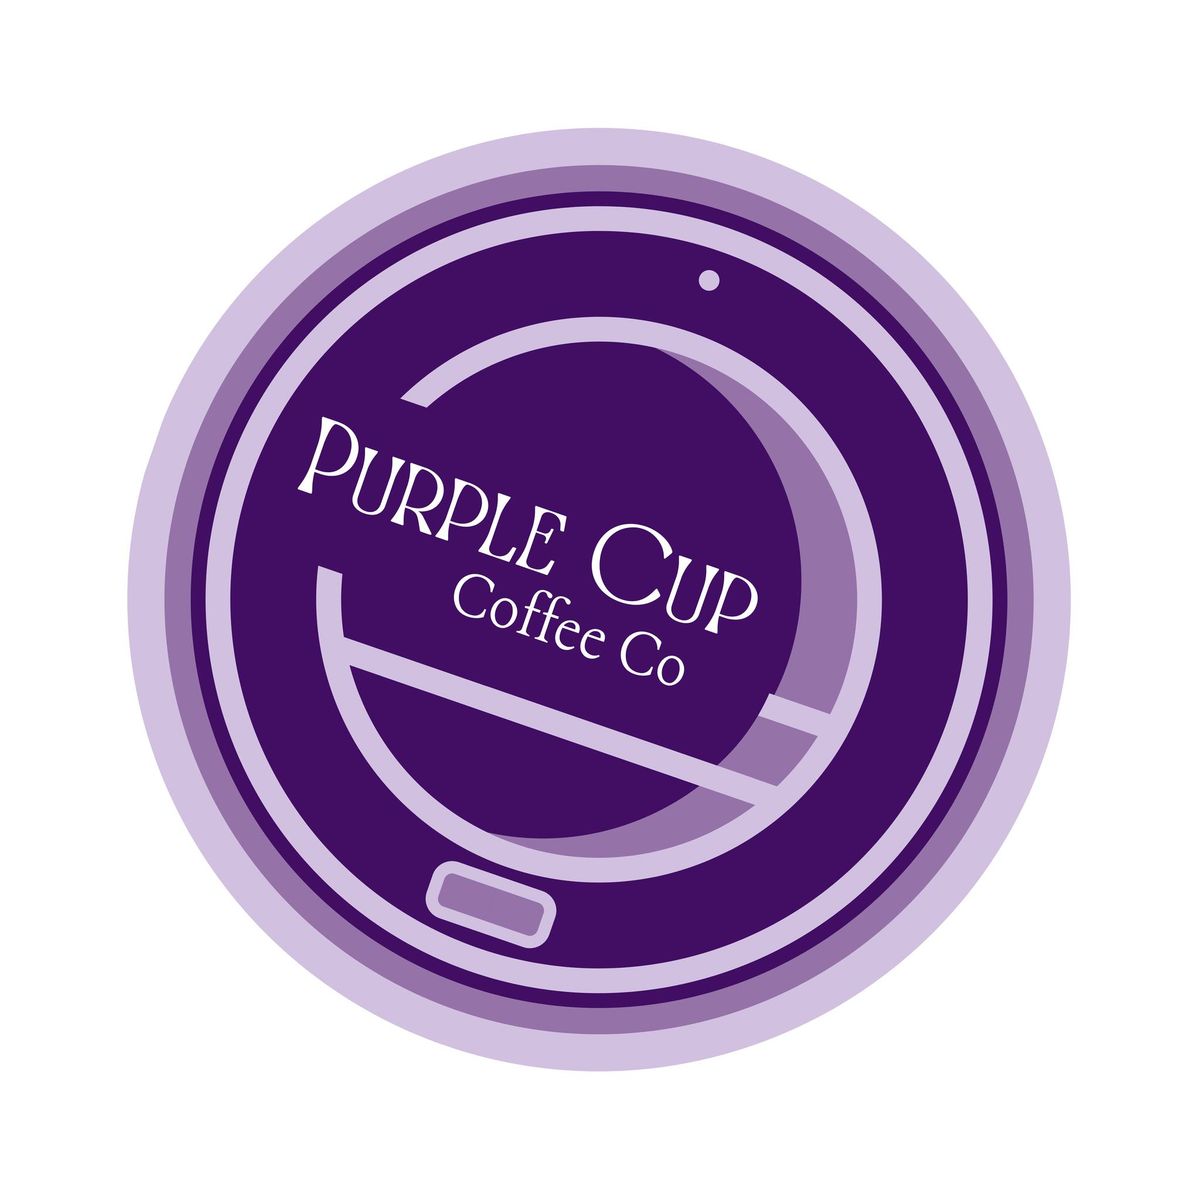 Grand Re-Opening of Purple Cup Coffee 